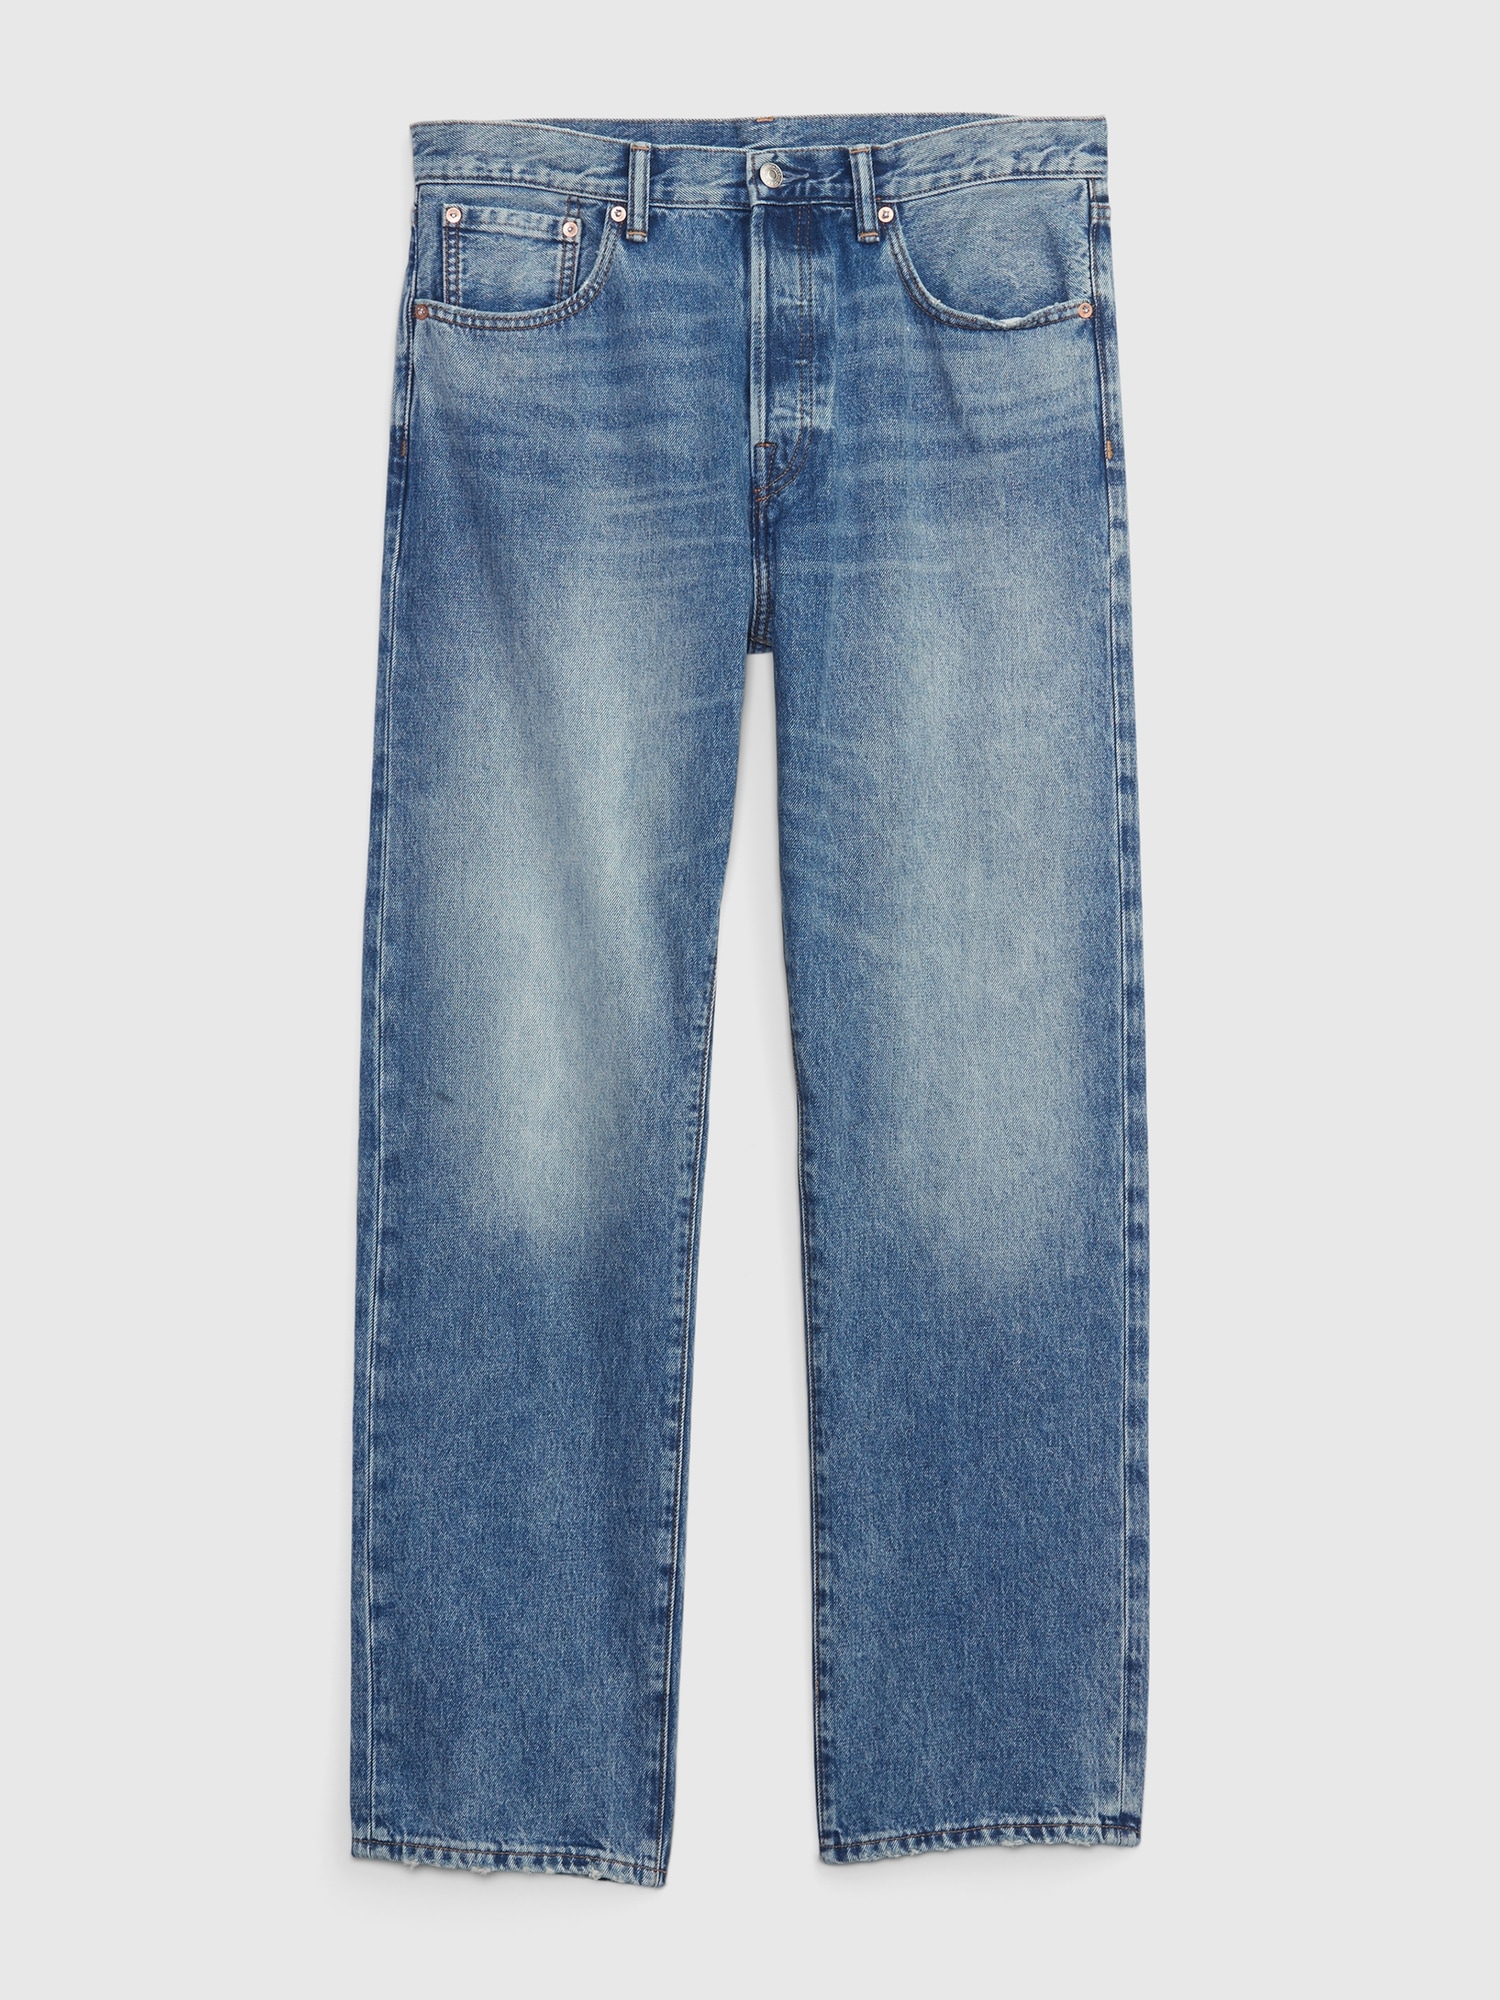 Gap Button Fly 90s Original Straight Fit Jeans with Washwell